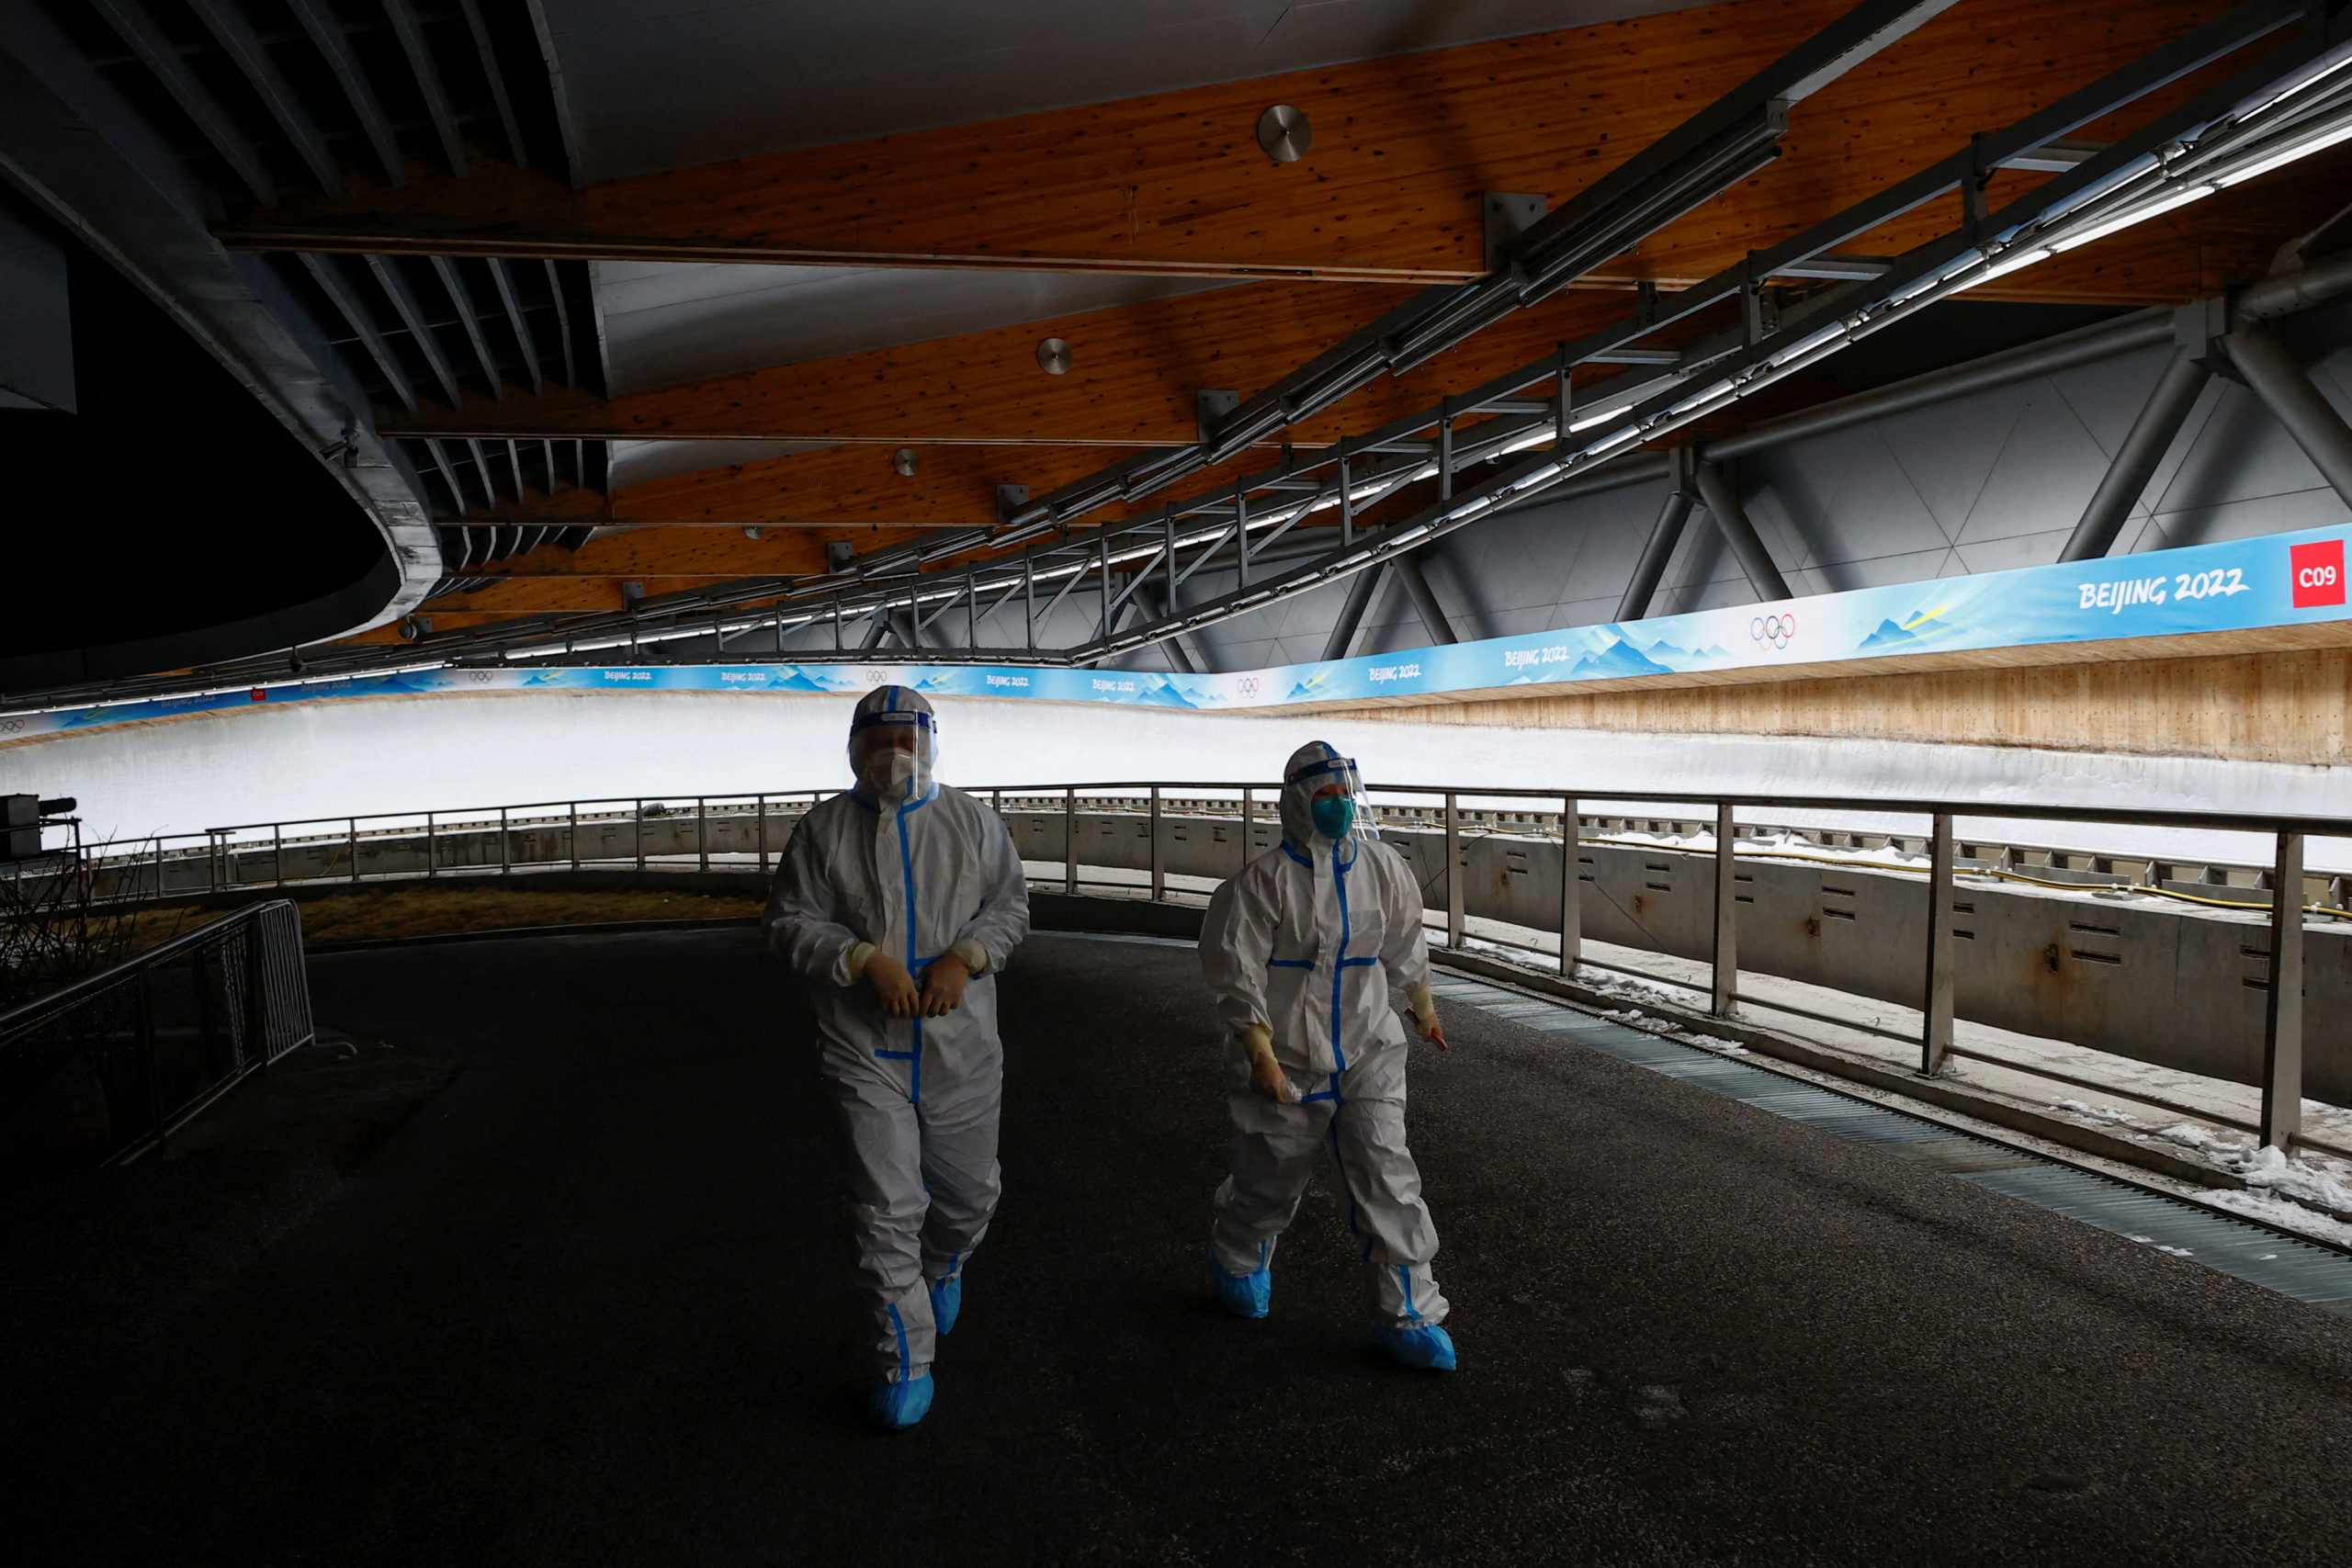 Staff wearing full body suits as protection against the coronavirus disease (COVID-19) walk along the track of the National Sliding Centre at the Beijing 2022 Winter Olympics, in Beijing, China, February 1, 2022. Picture taken February 1, 2022.